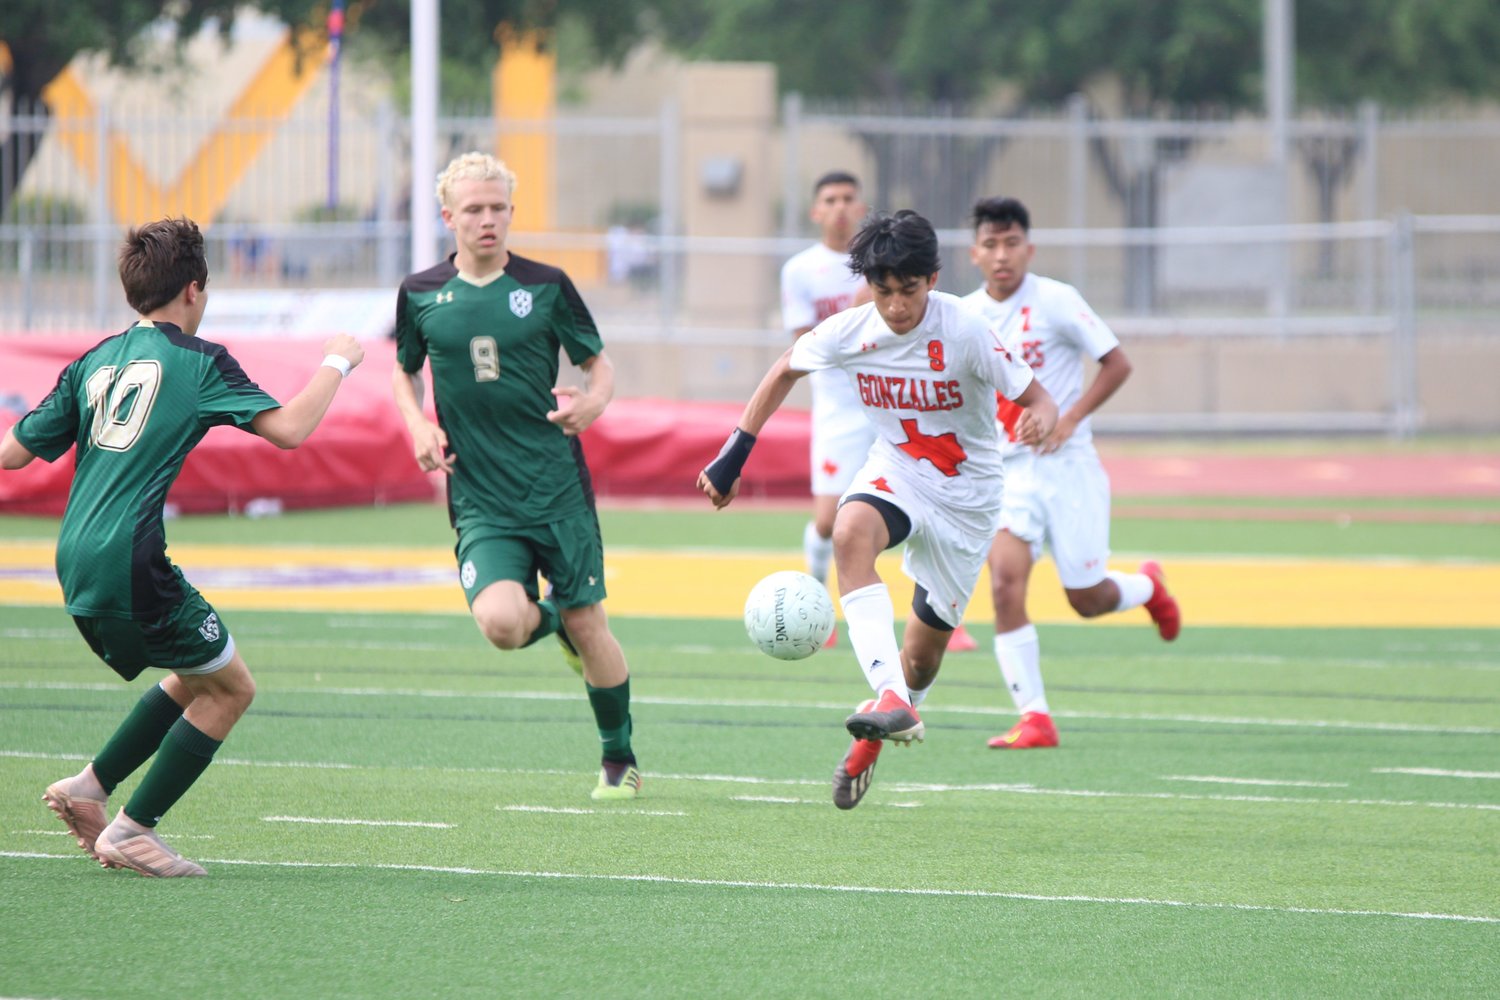 Adrian Rodriguez (9) scored a goal within four minutes of game clock in the Apaches 2-1 loss against Canyon Lake in McAllen on Friday, April 12.